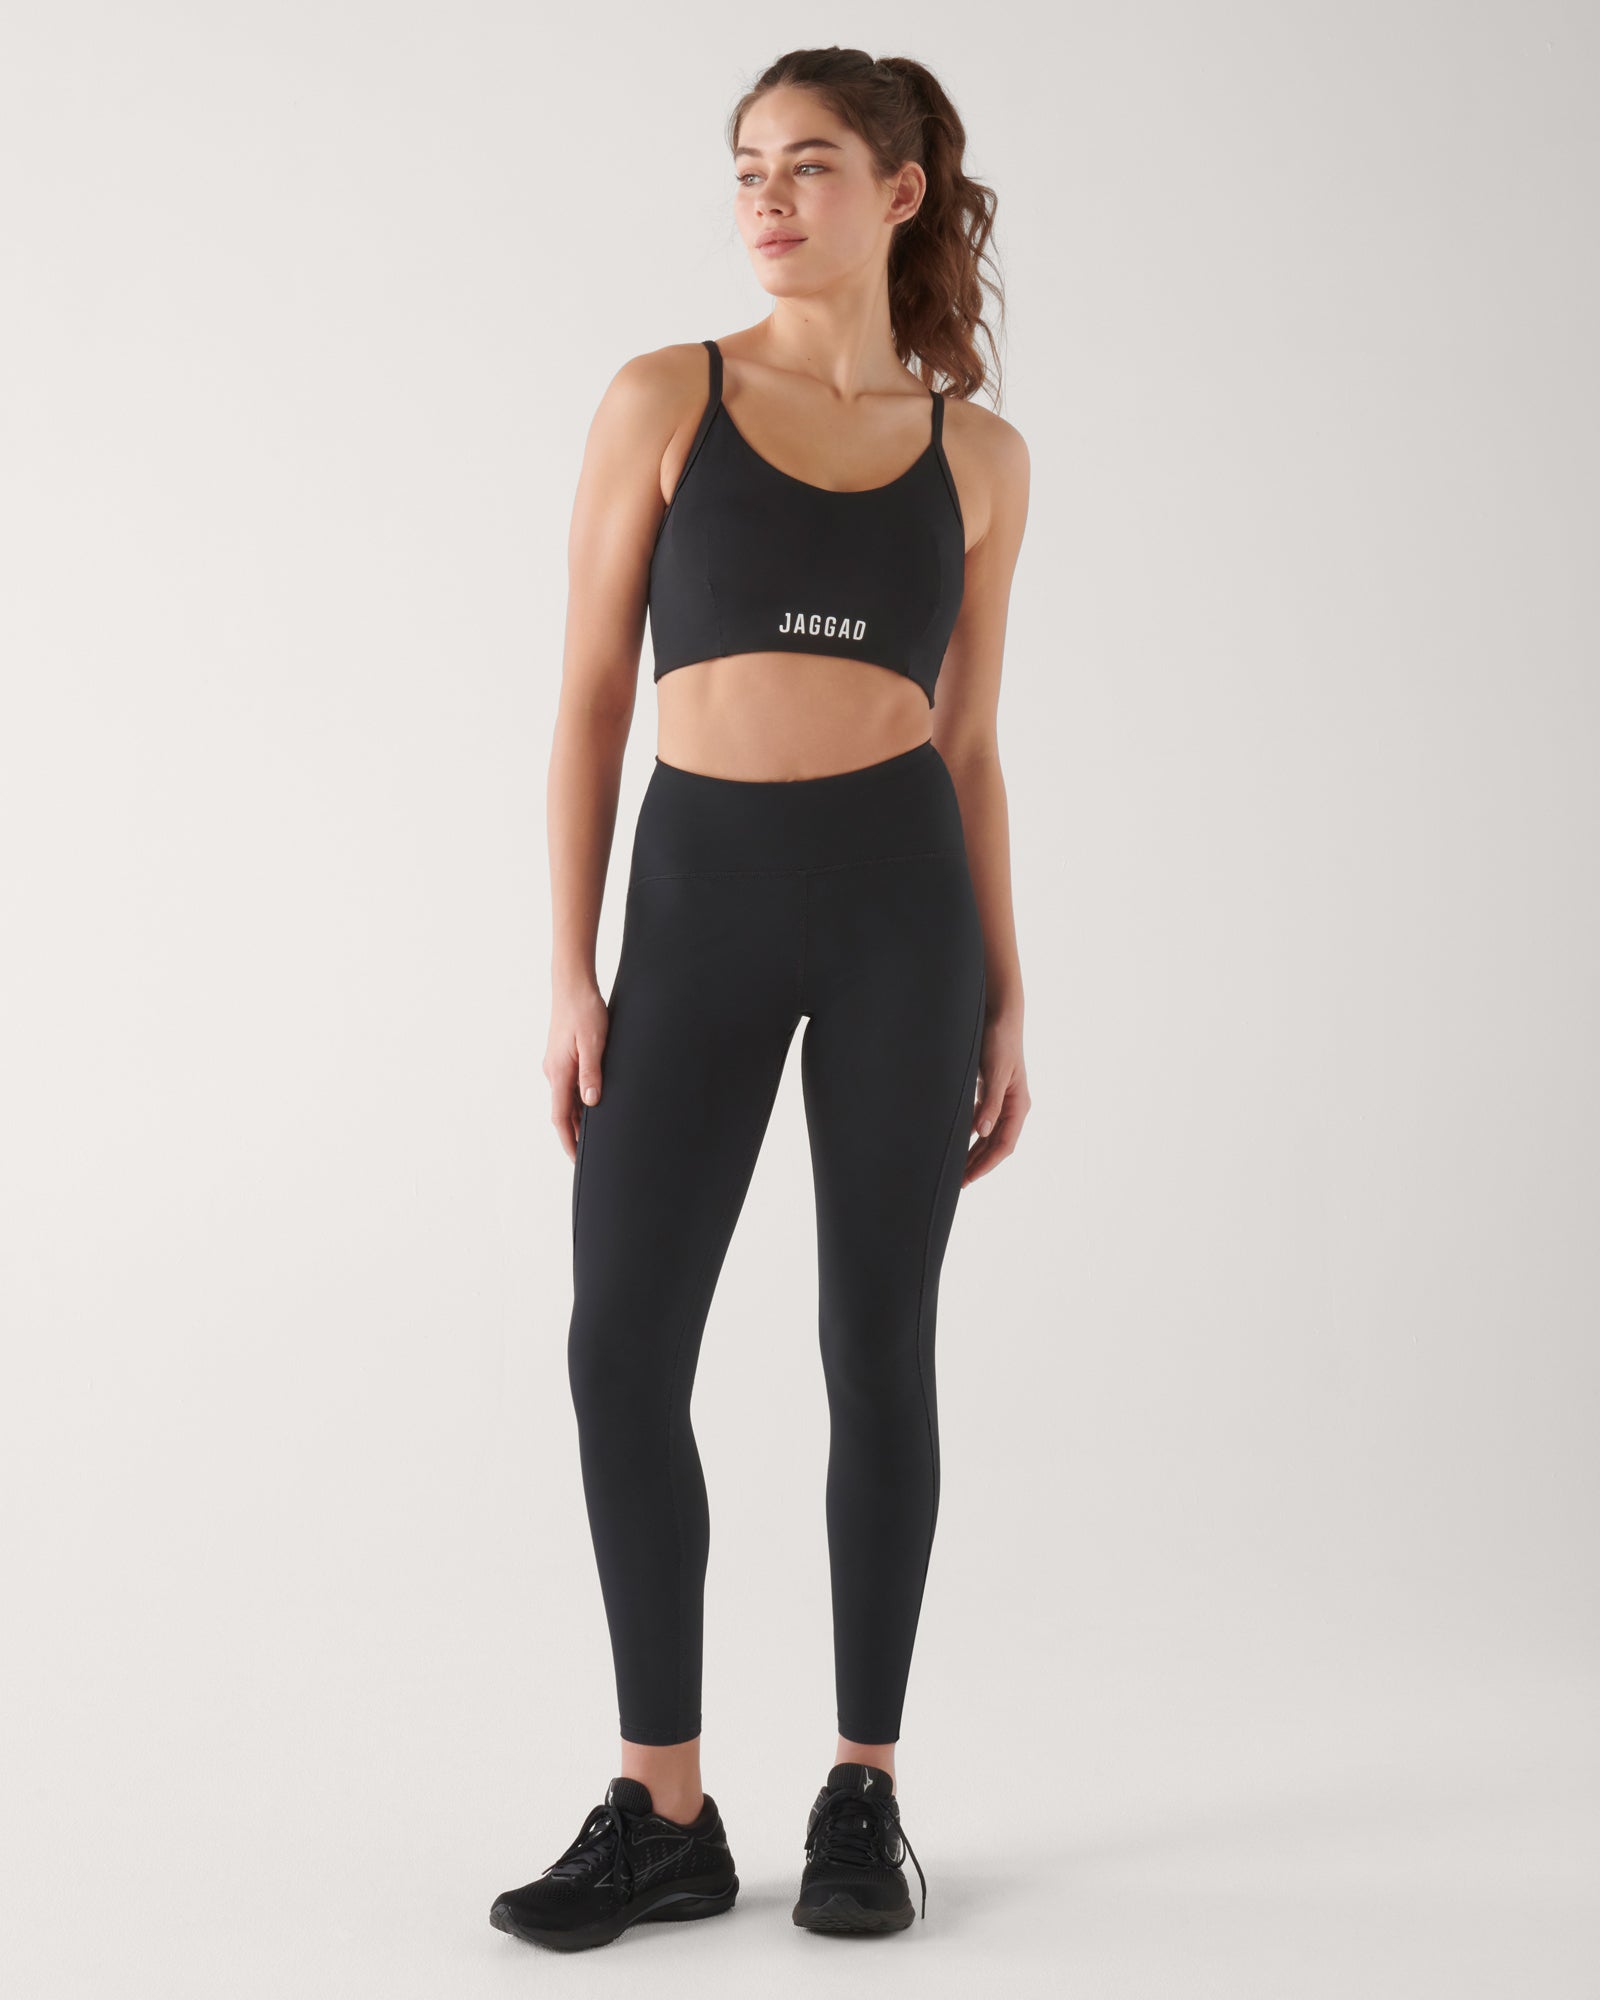 THE UPSIDE Compression Athletic Leggings for Women